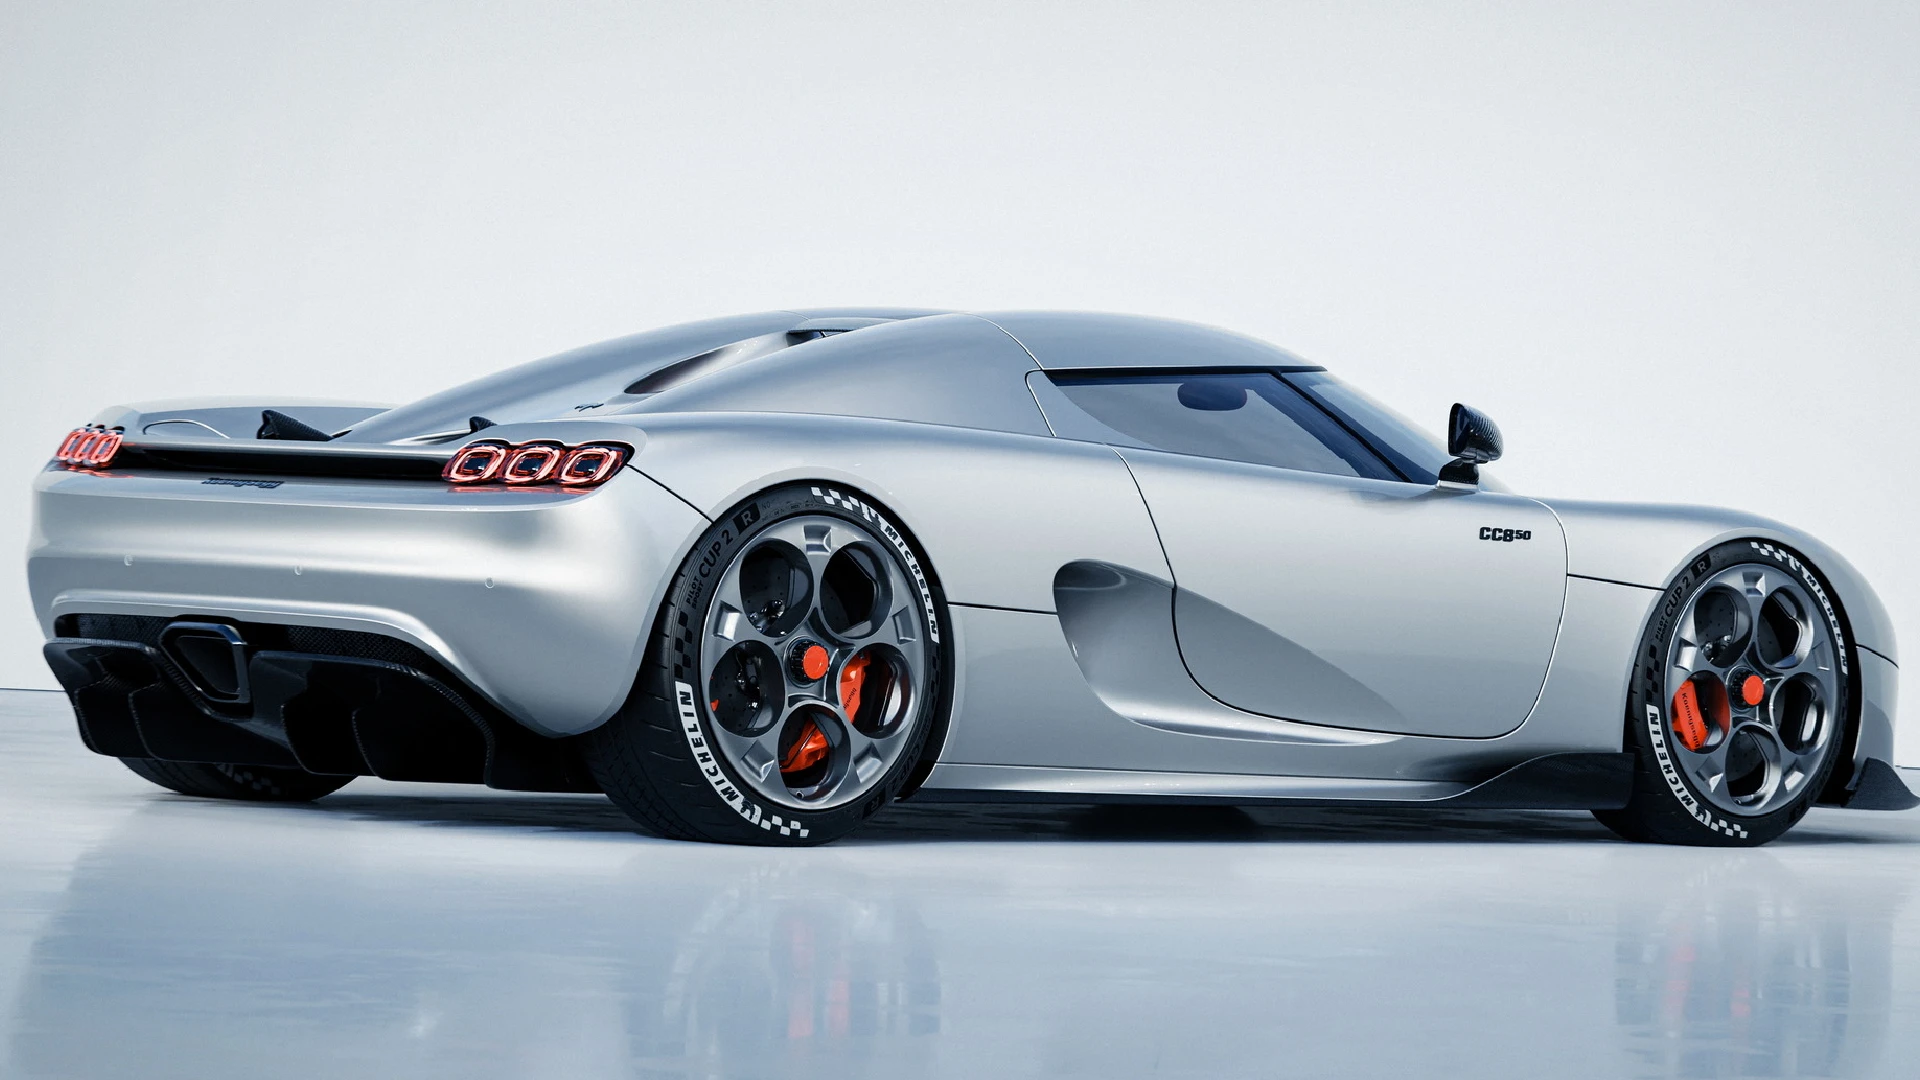 Koenigsegg CC850 Sold Out, Additional 20 Will Be Added To Production Run